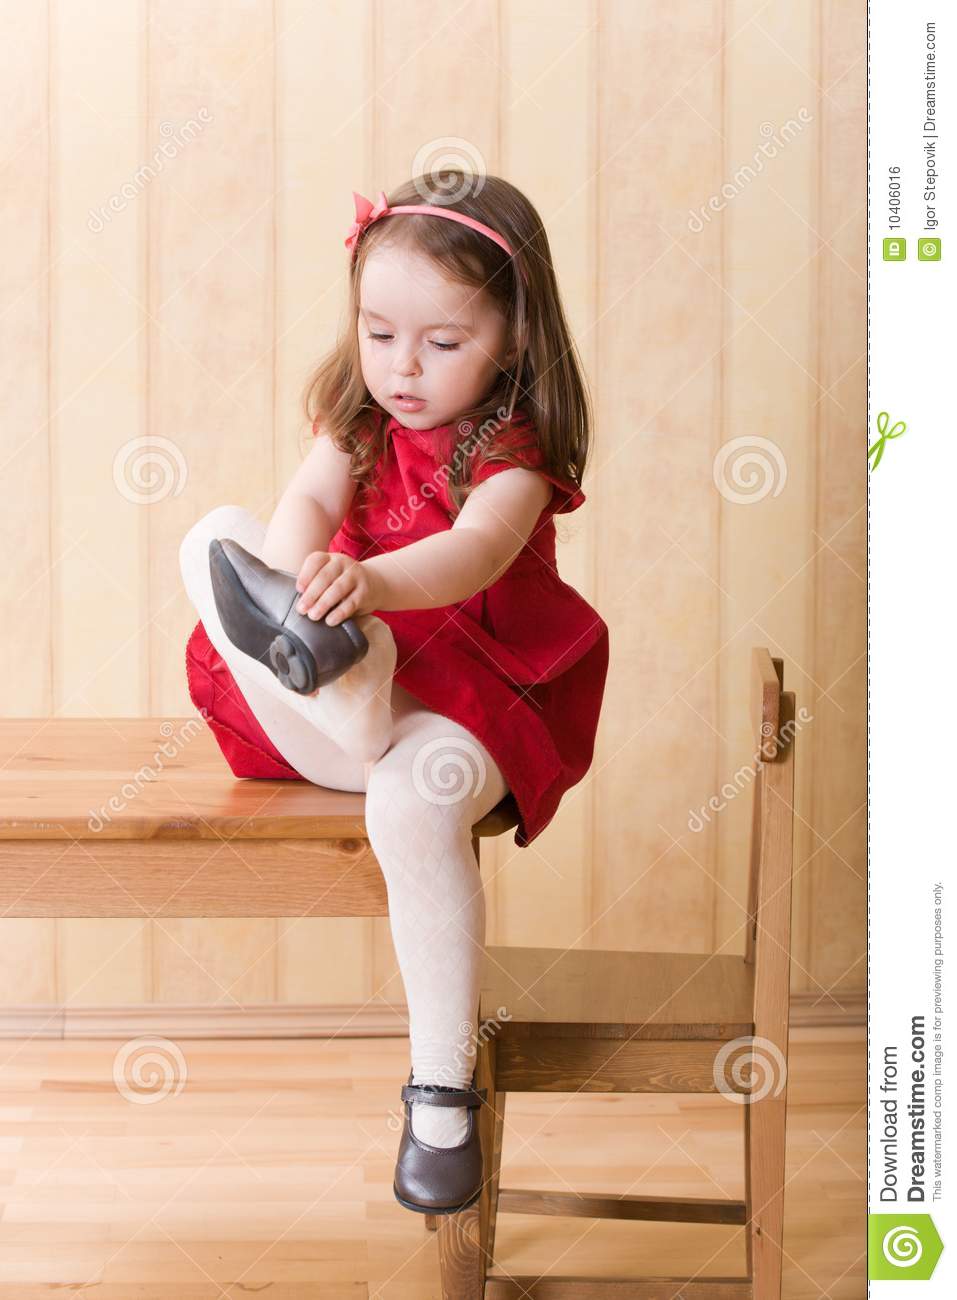 Girl Sitting On Table And Put On One S Shoes Royalty Free Stock Image